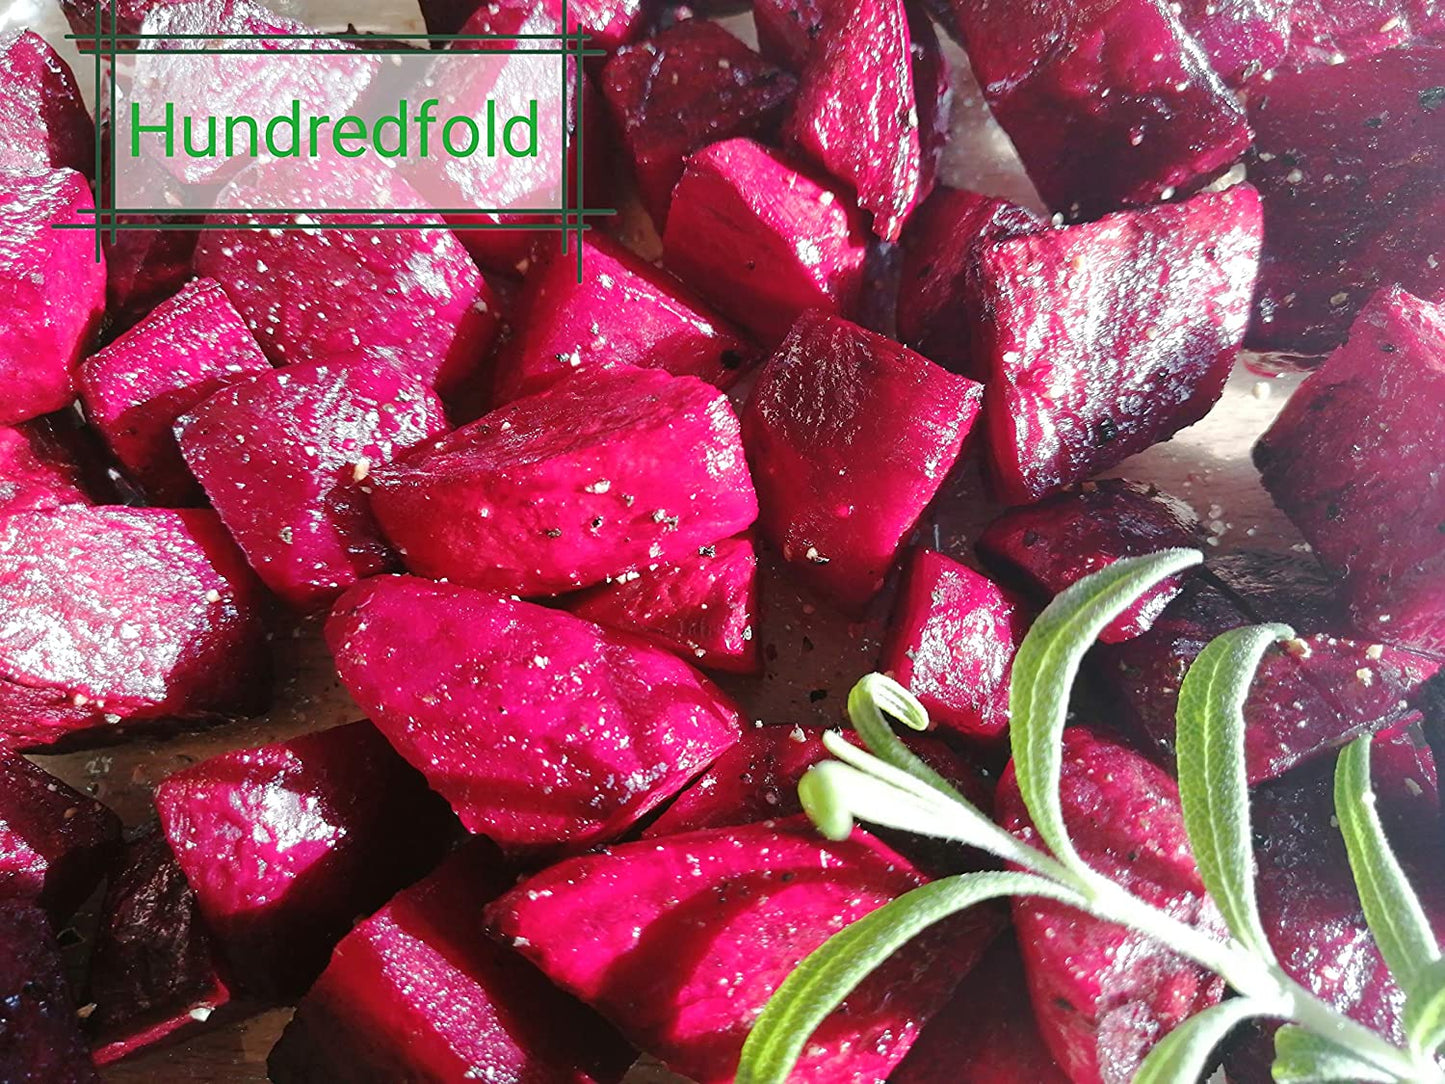 Hundredfold Organic Bull’s Blood Beet 200 Seeds - Beta vulgaris Non-GMO Bulls Blood Heirloom Beetroot Excellent for Micro-Greens, Baby-Leaves or Roots, for Container, Yard or Garden Planting